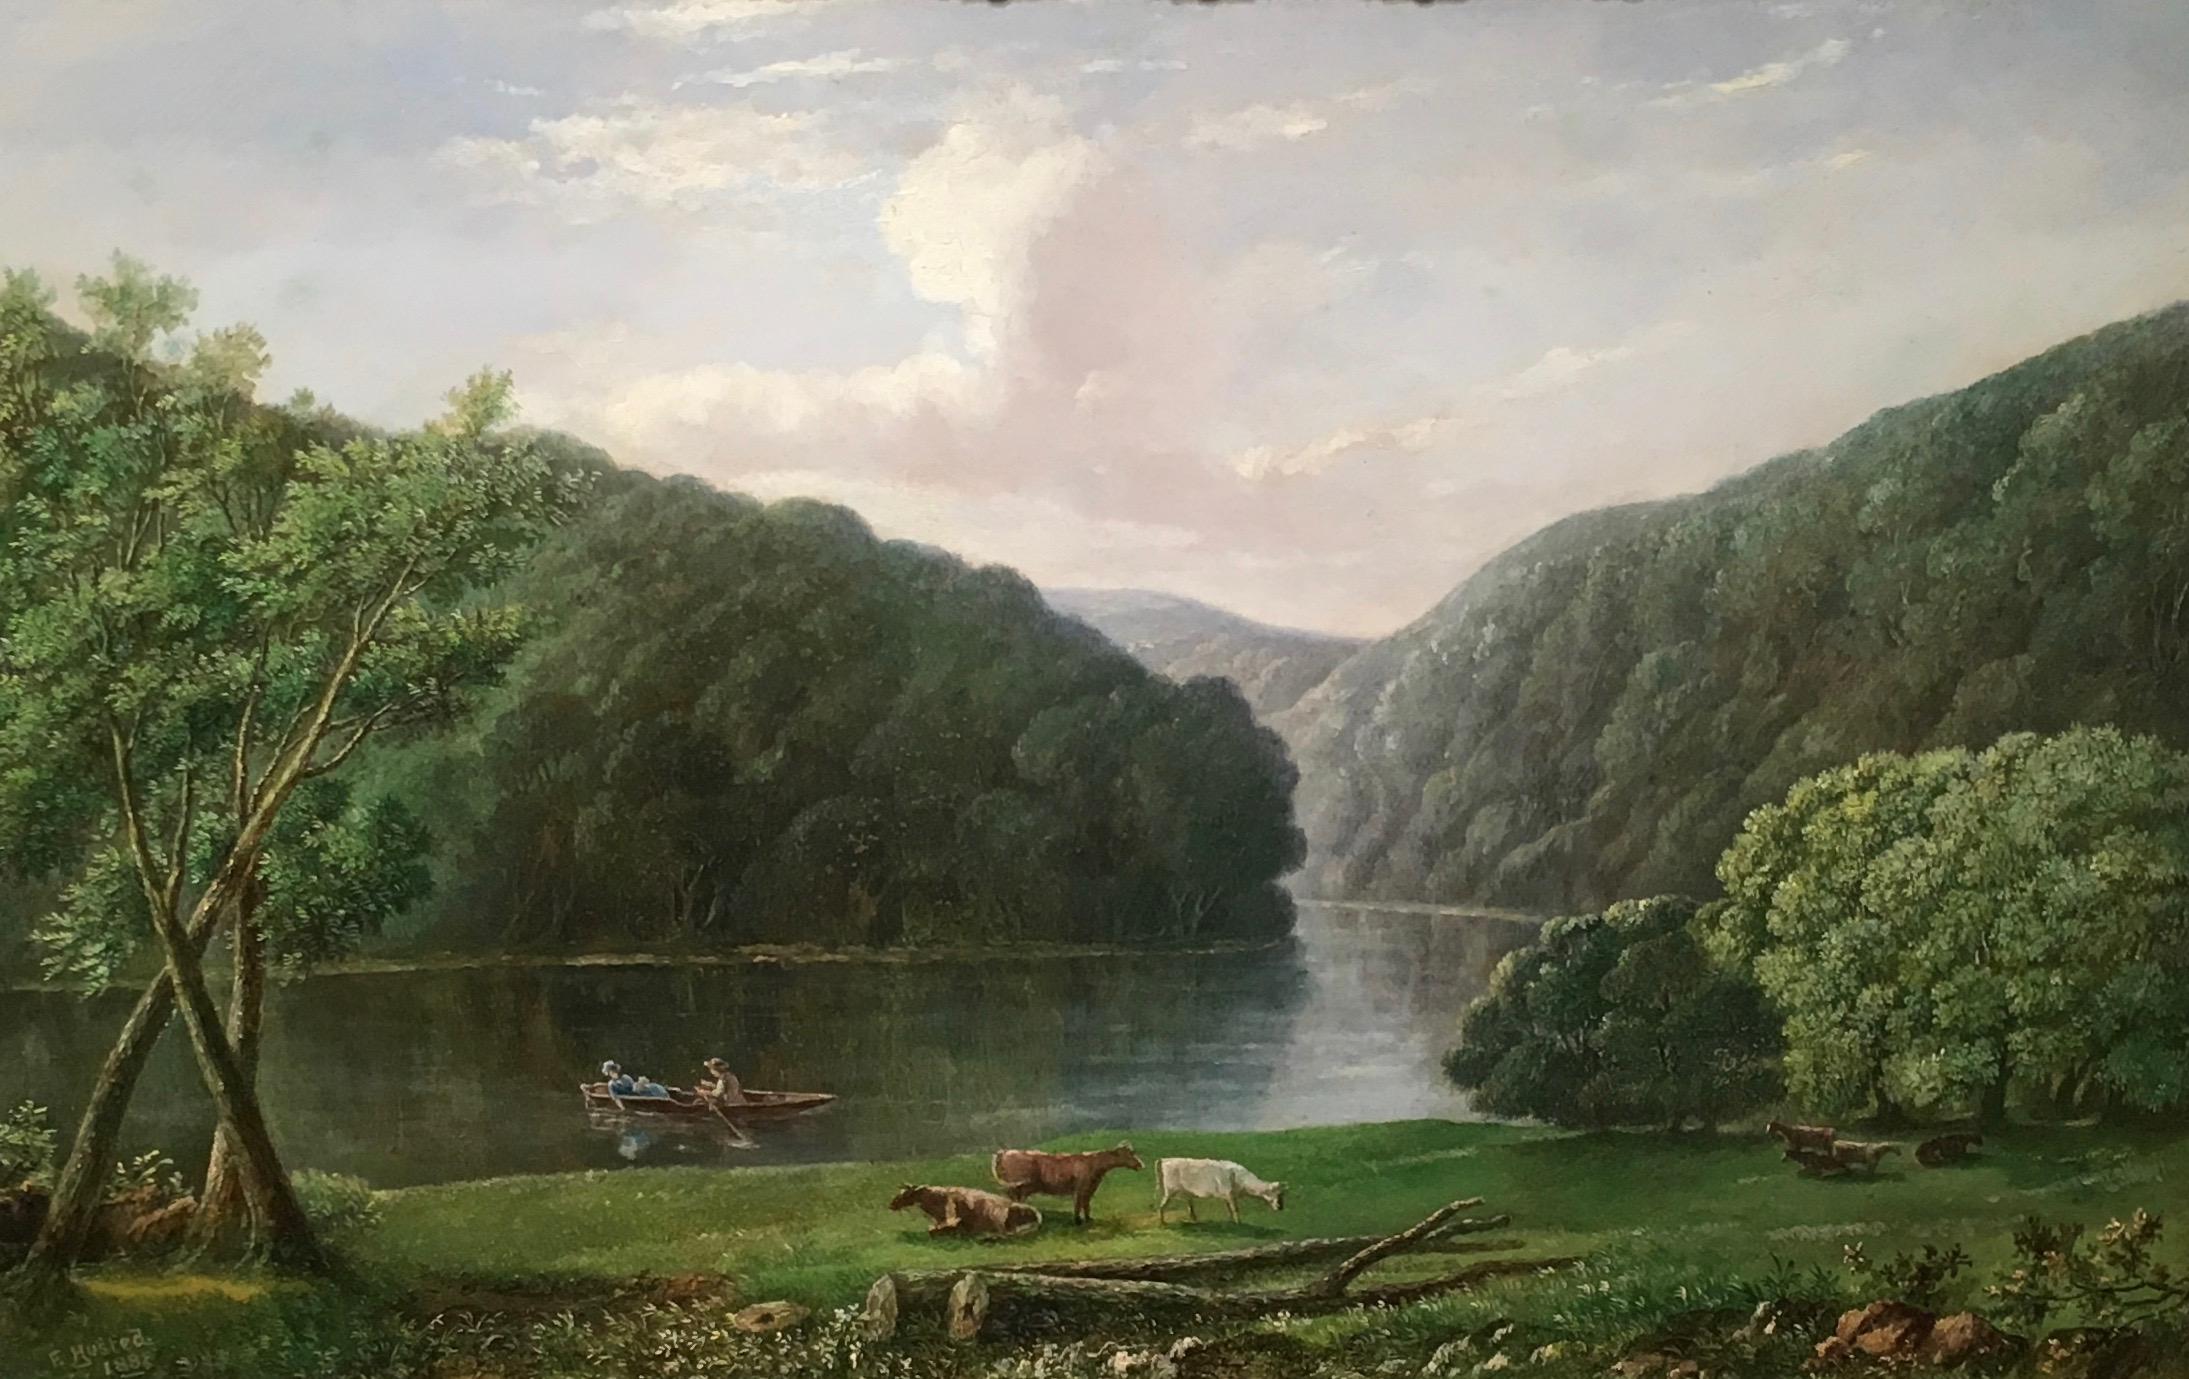 Pair of English Victorian 19th-Century Antique river landscapes with cows, near the Wye Valley, and Tintern Abby, famous places in the British landscape. 

F.Husted was an English 19th-century landscape painter. He worked throughout the Uk painting